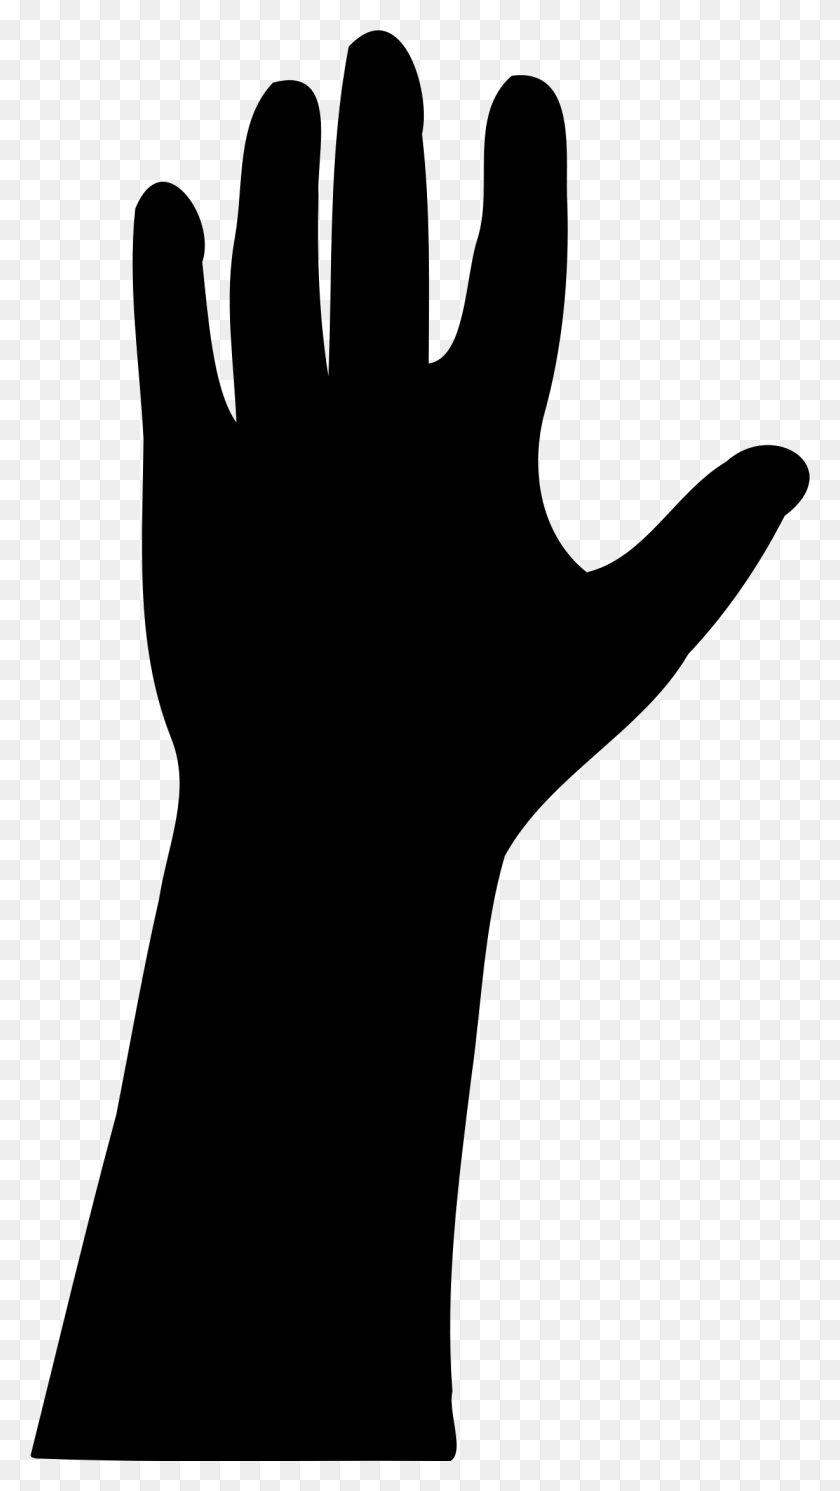 1228x2253 Raised Hand Cliparts Free Download Clip Art - Raising Your Hand Clipart